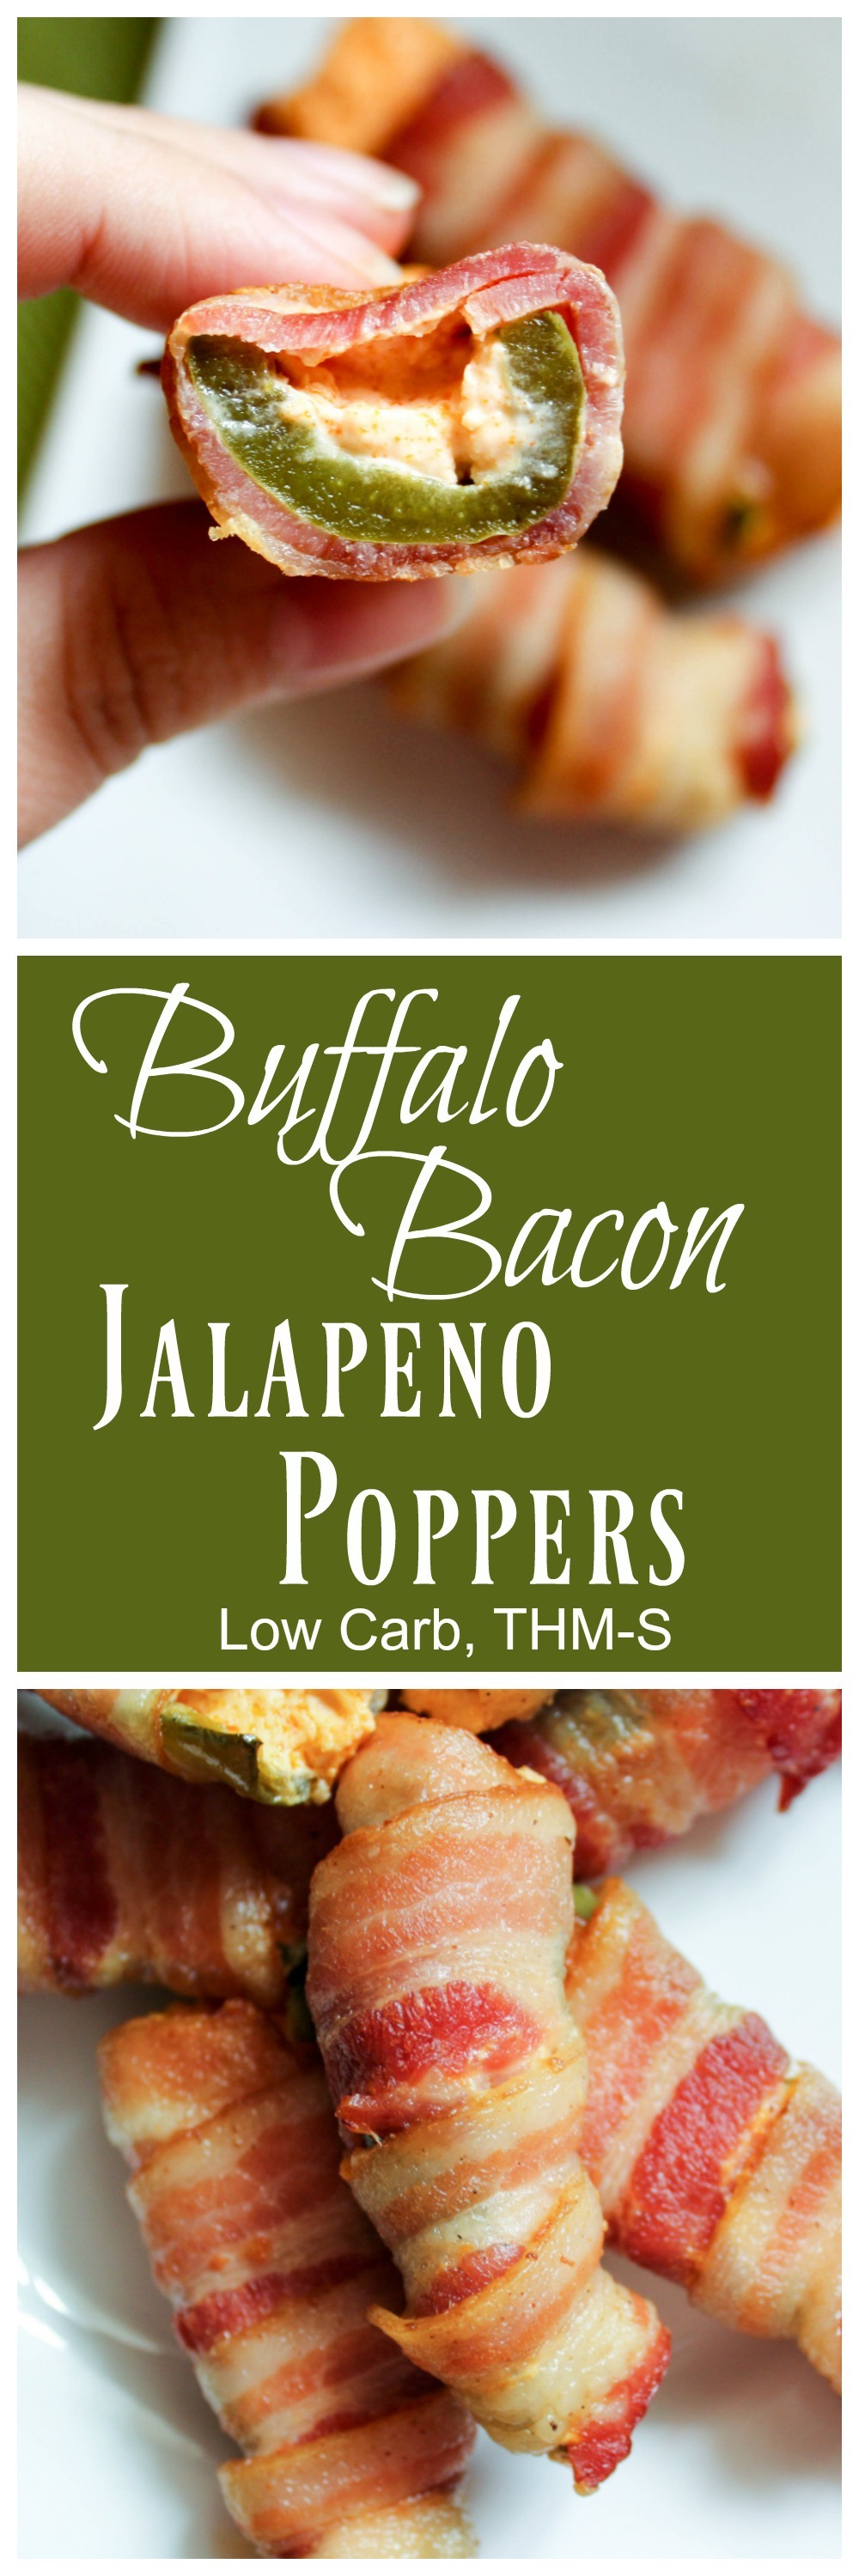 Buffalo Bacon Jalapeno Poppers (Low Carb, THM-S)